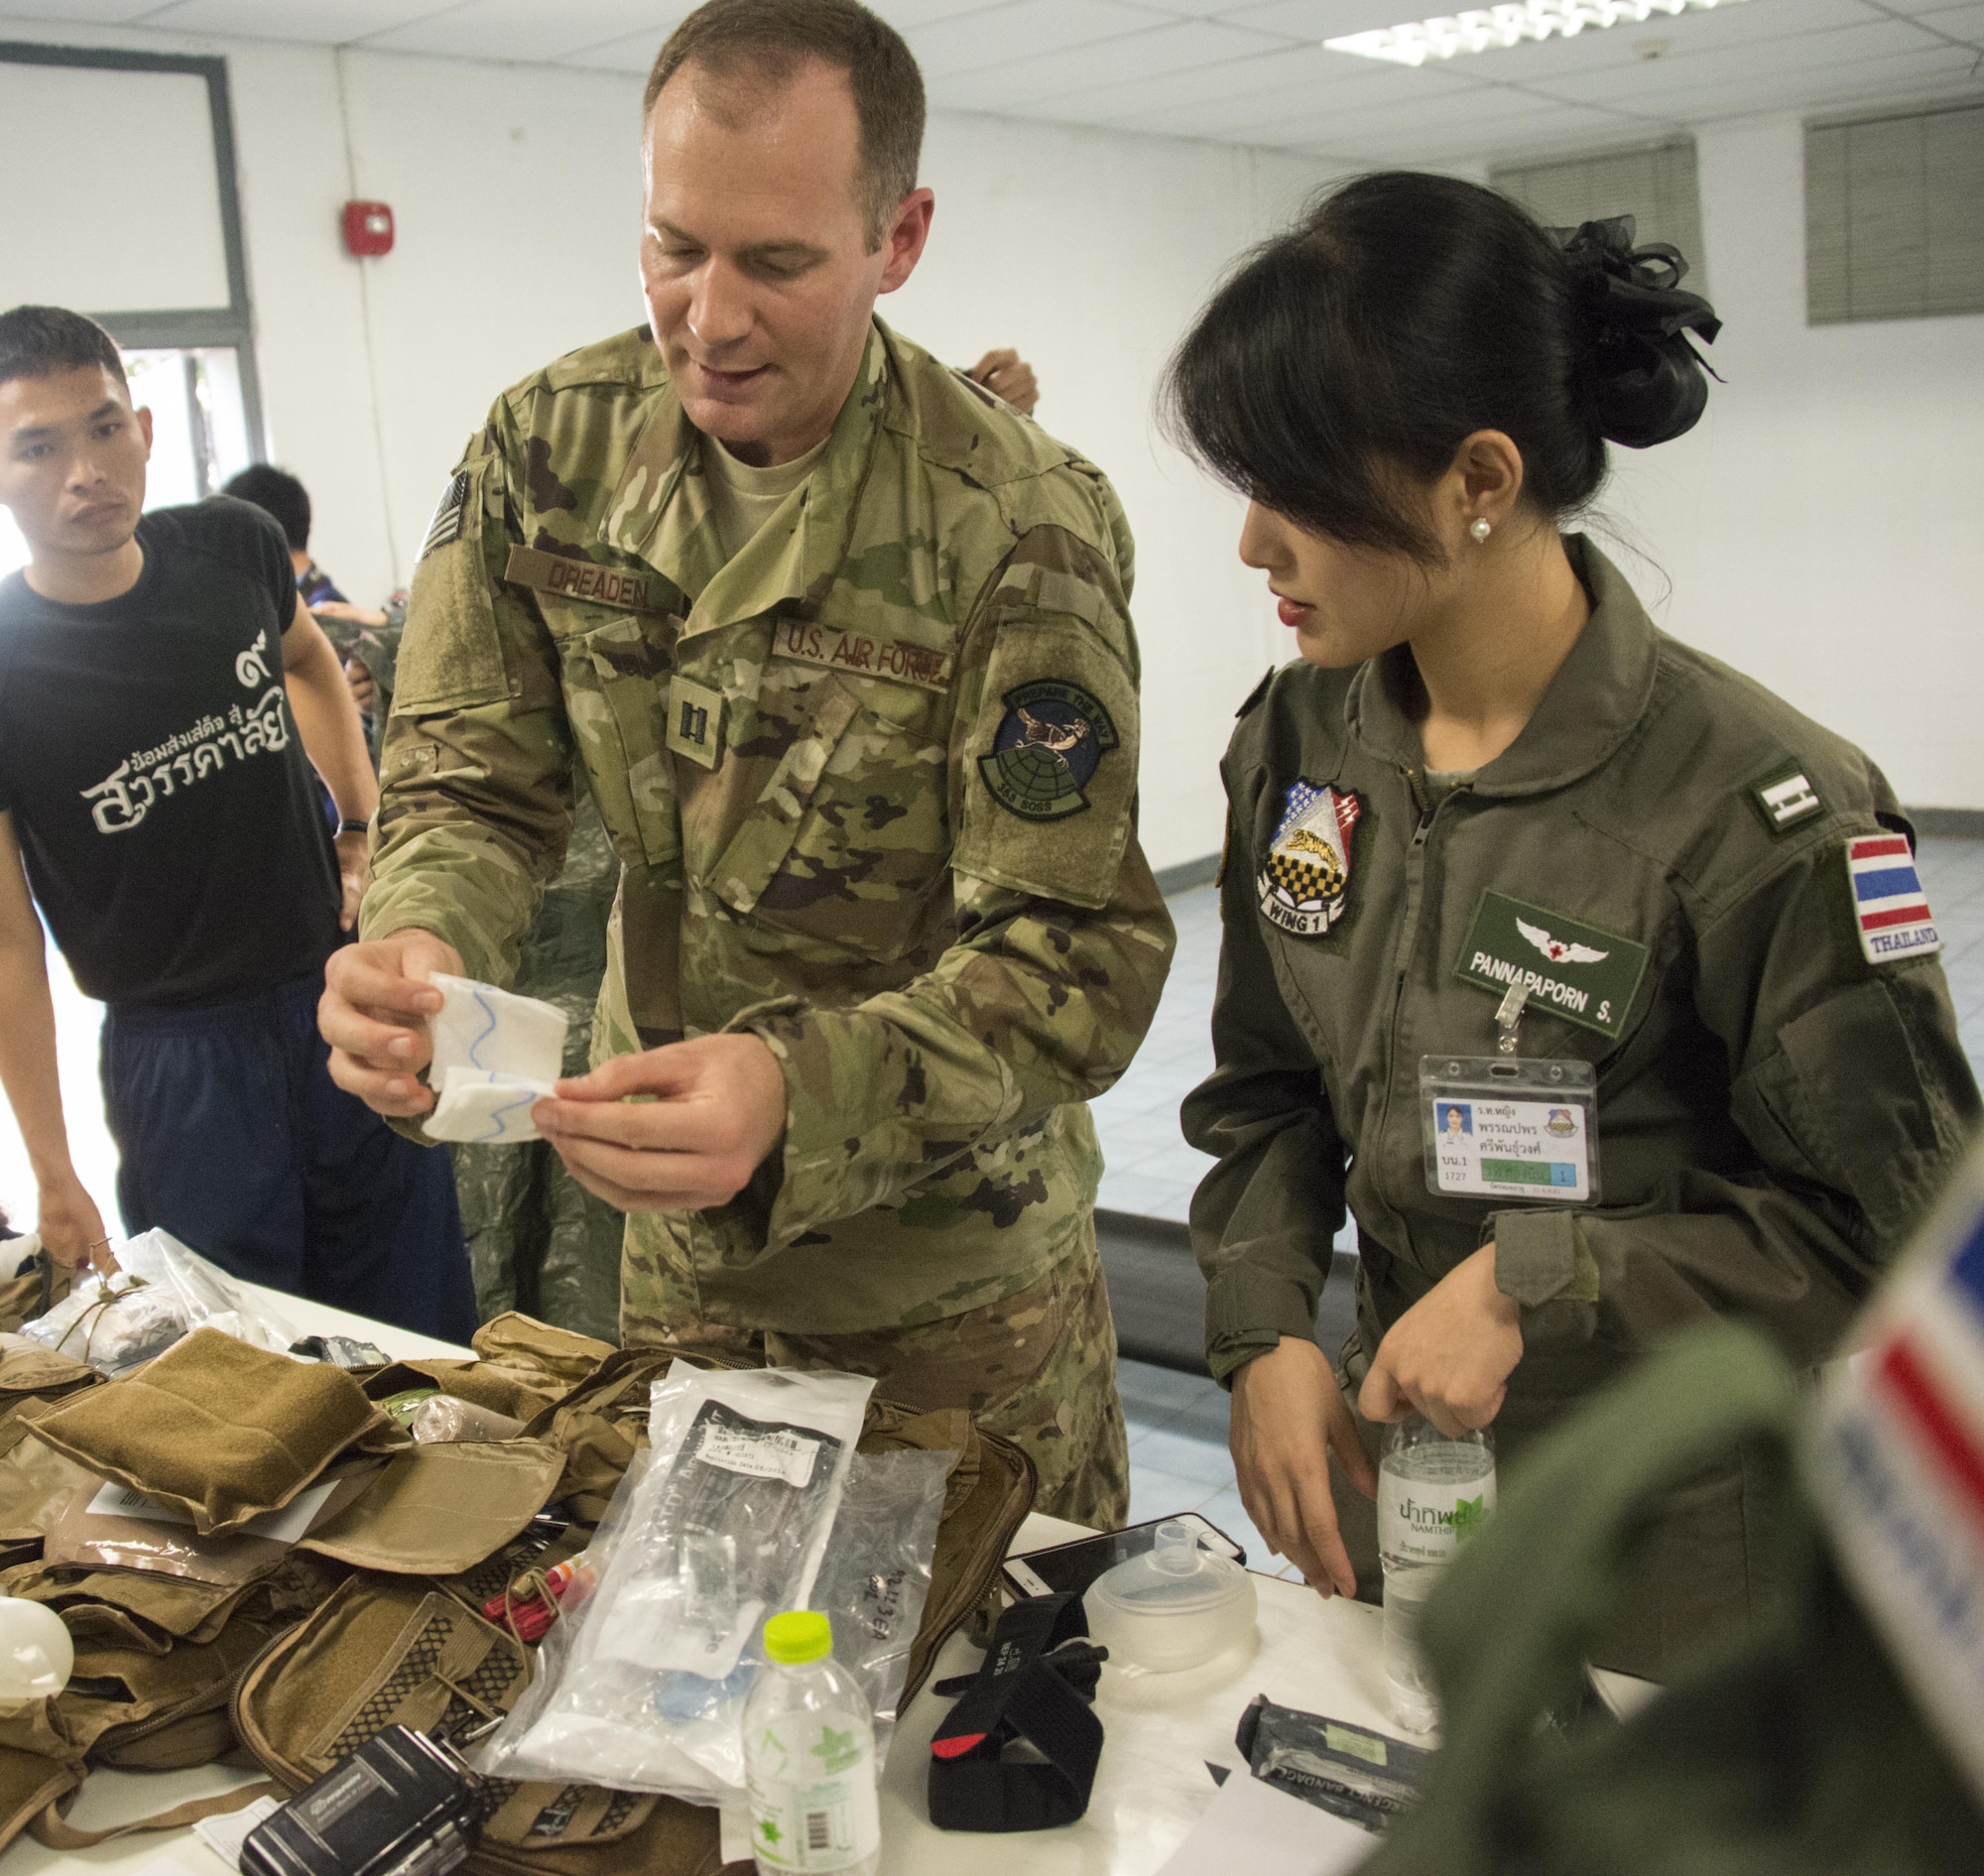 U.S. Air Force Capt. Zachary Dreaden, 353rd Special Operations Support Squadron flight surgeon, showcases his unit’s tactical medical gear to counterparts from the Royal Thai Air Force Wing 1 Hospital, Feb. 22, 2017 at Korat Air Base, Thailand. The RTAF medical exchange during Cobra Gold 2017 offered an opportunity to advance interoperability and increase partner capacity. (U.S. Air Force photo by Capt. Jessica Tait)